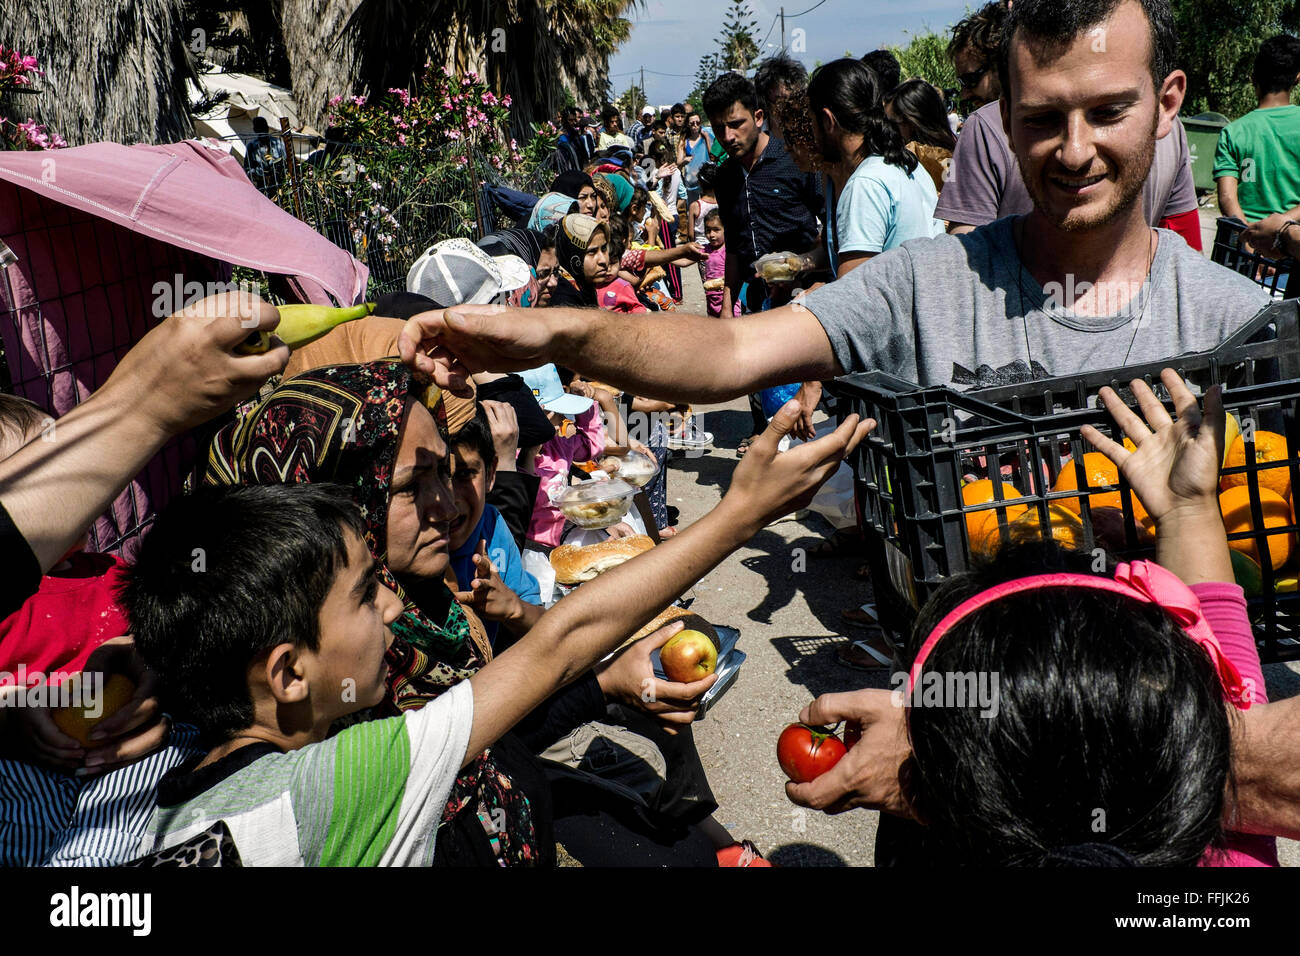 03/06/2015  -  Greece / South Aegean / Kos island  -  People from Solidarity team of Kos distribute food twice a day in Captain Stock Photo